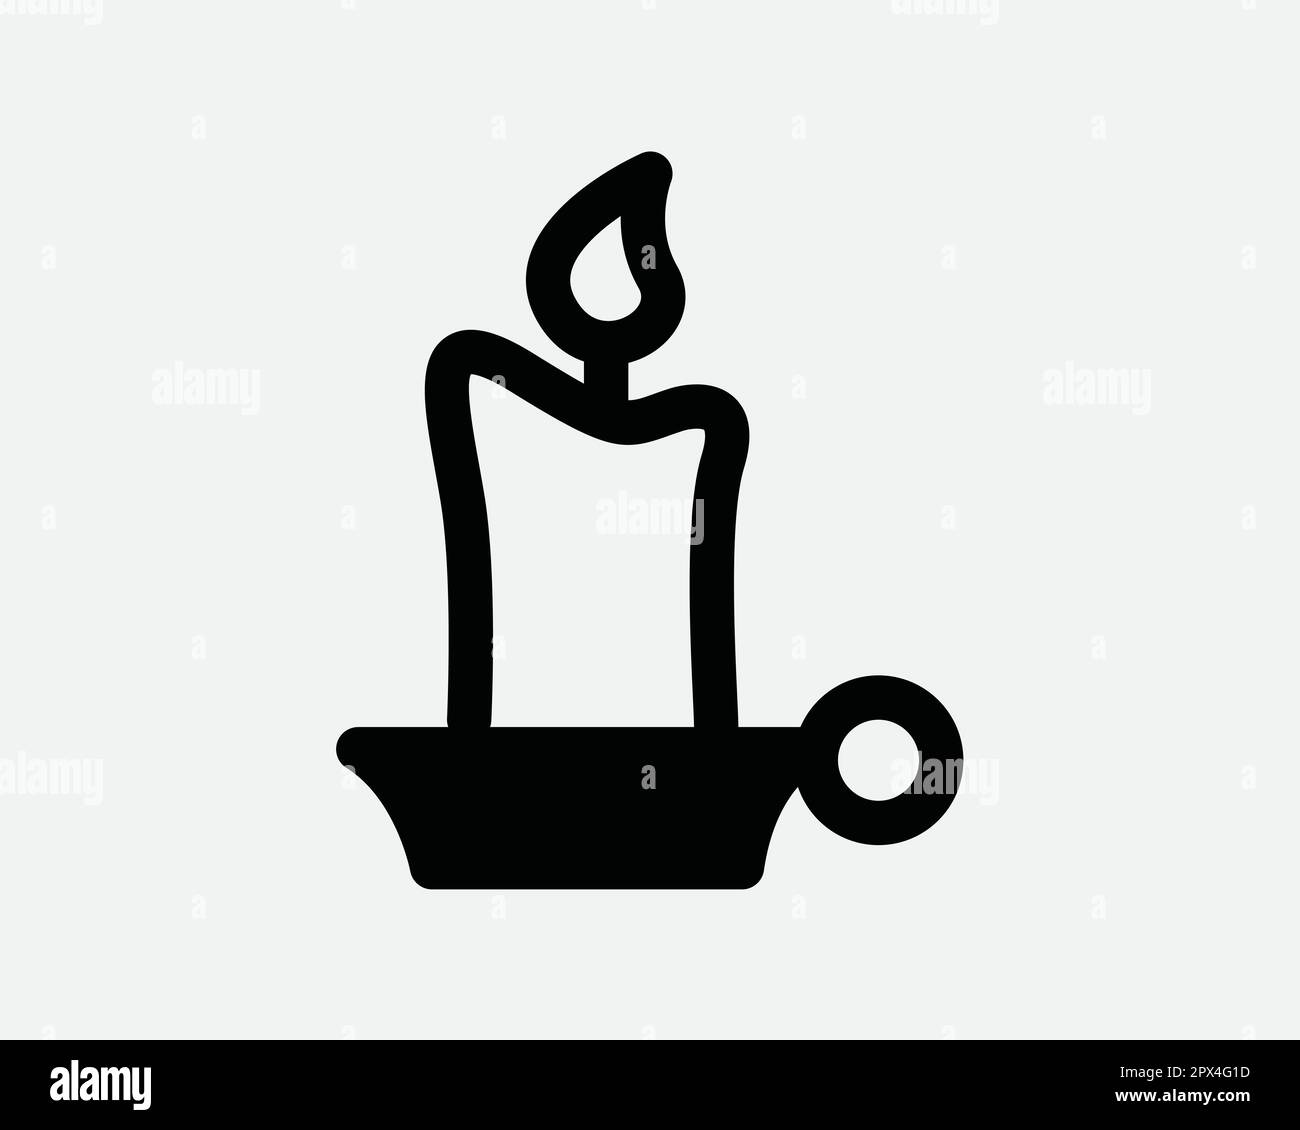 Candle Holder Icon. Black and White Candleholder Candlelight Light Lamp Burner Plate Sign Symbol Artwork Graphic Illustration Clipart Vector Cricut Stock Vector